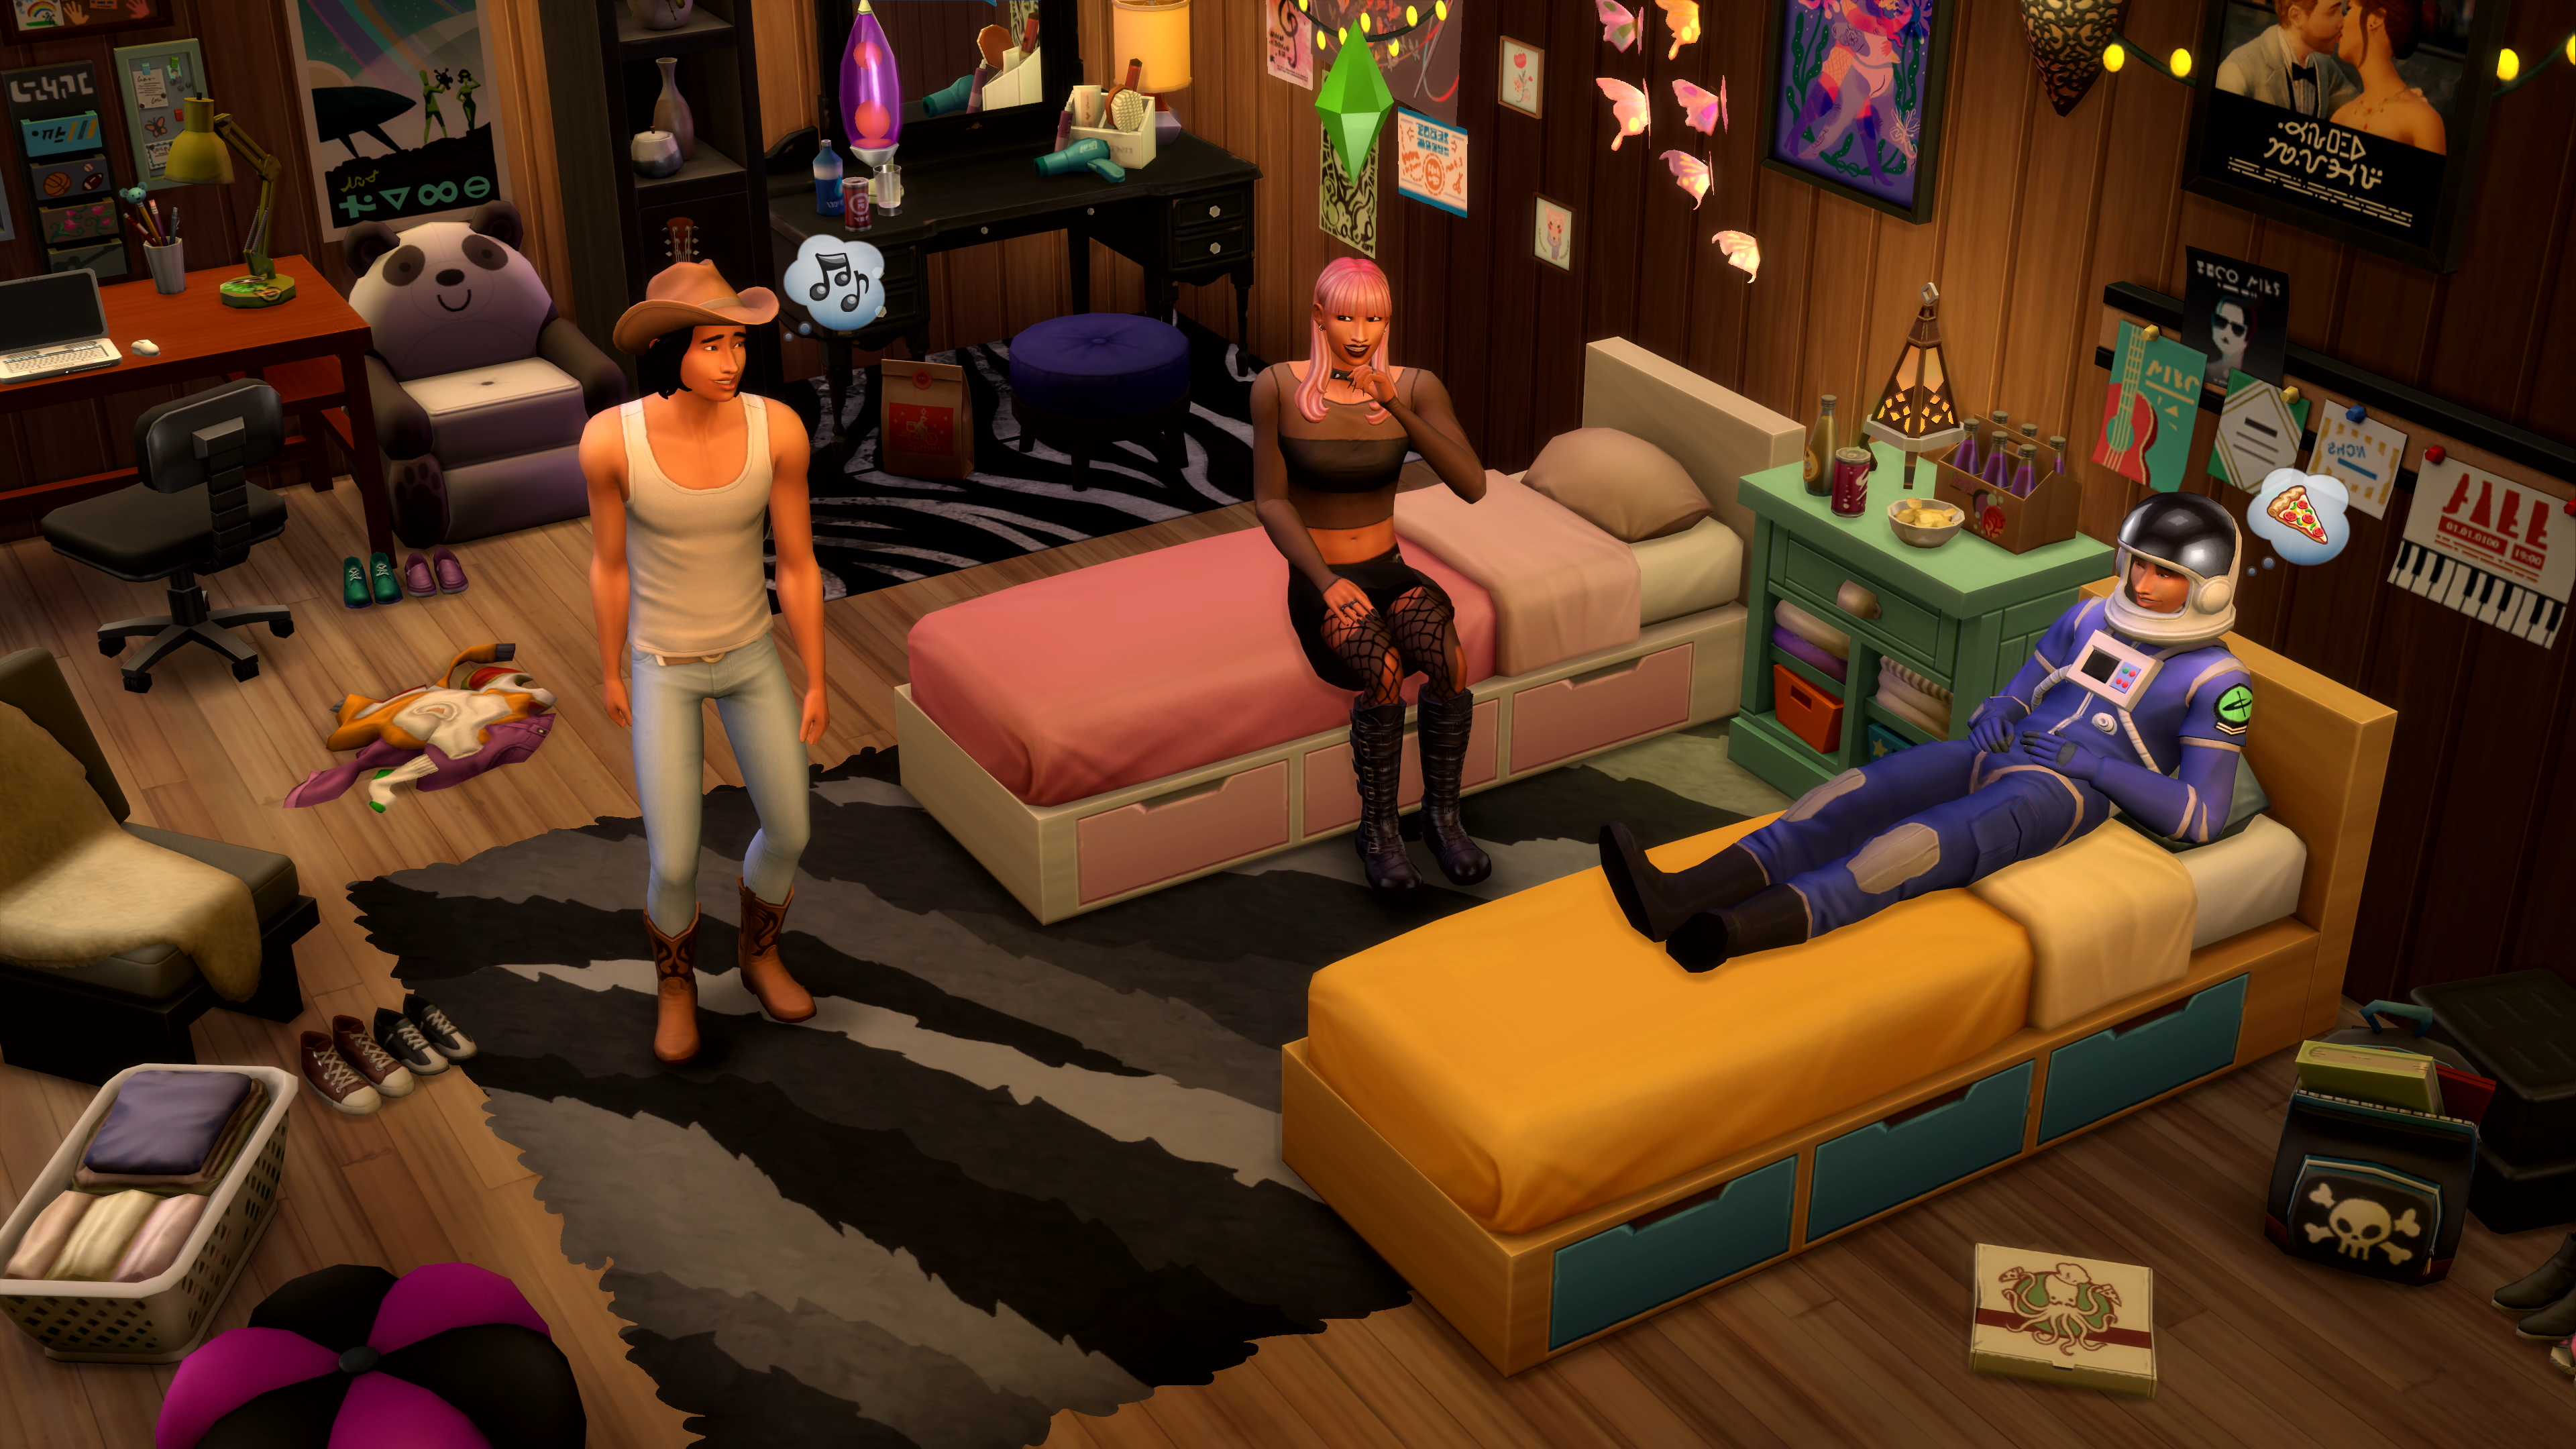 The Cali in mod sims sex Spice up